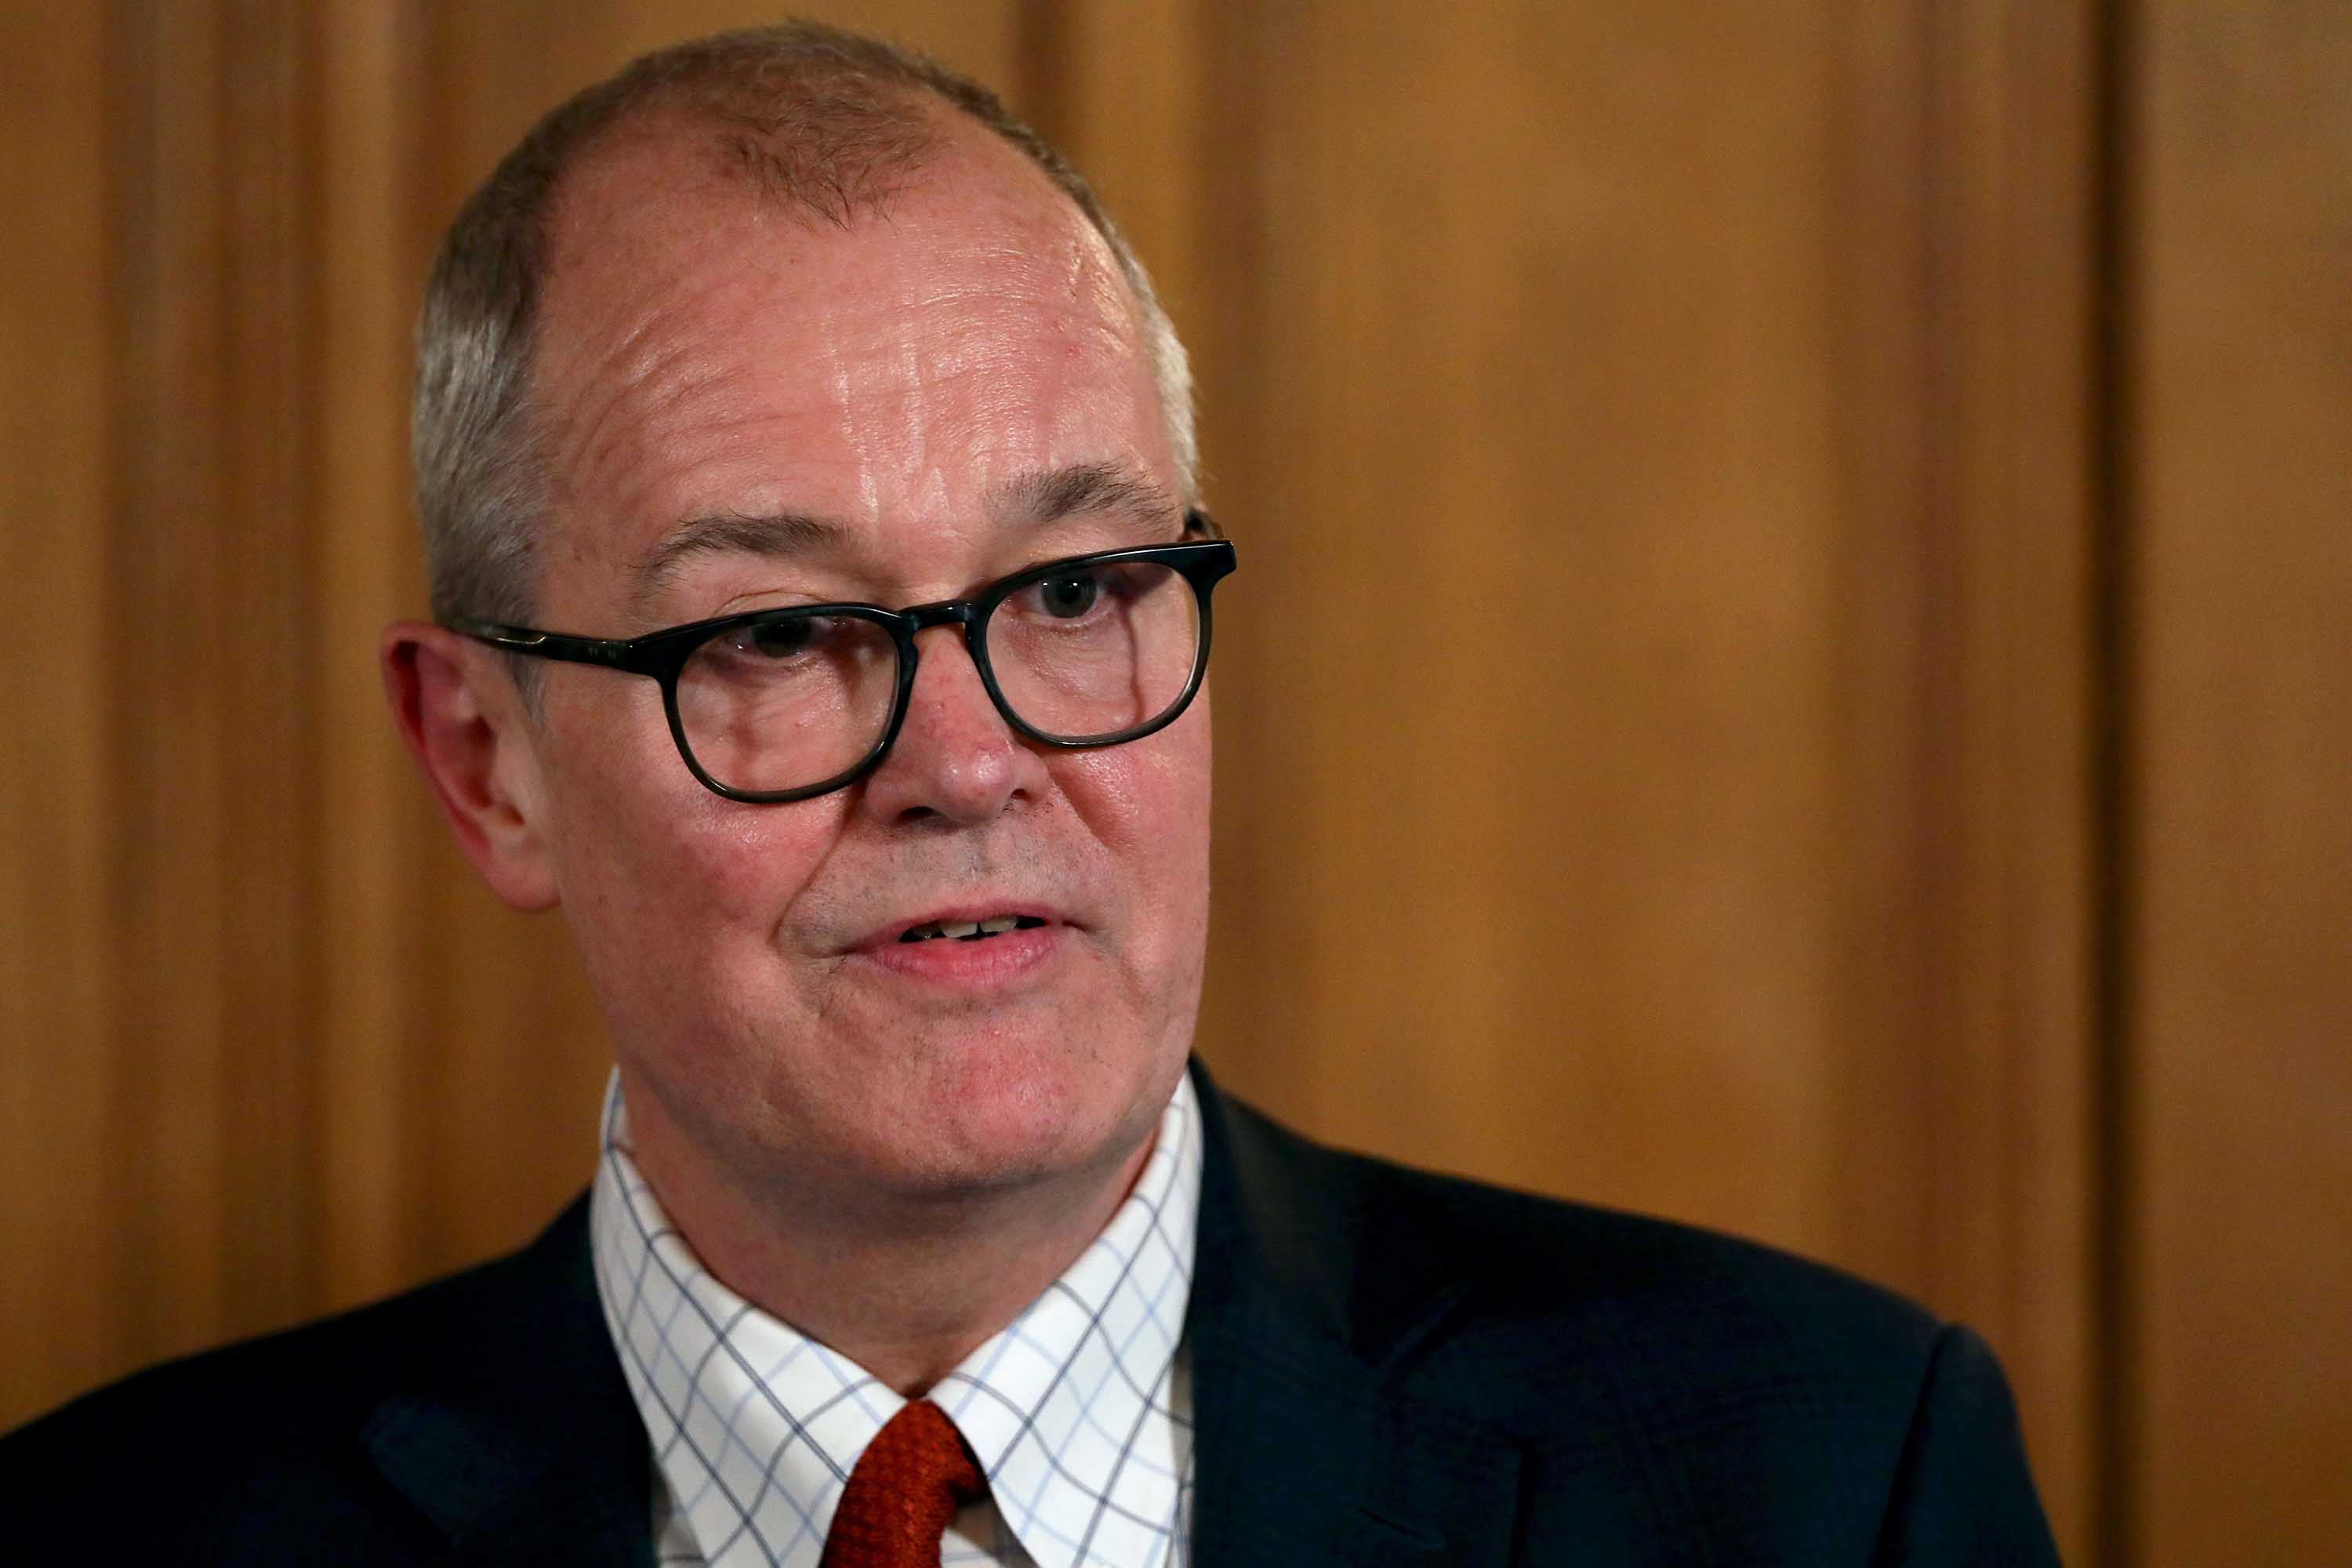 Government Chief Scientific Adviser, Sir Patrick Vallance attends a news conference addressing the UK government's response to the novel coronavirus outbreak in London, on March 12.